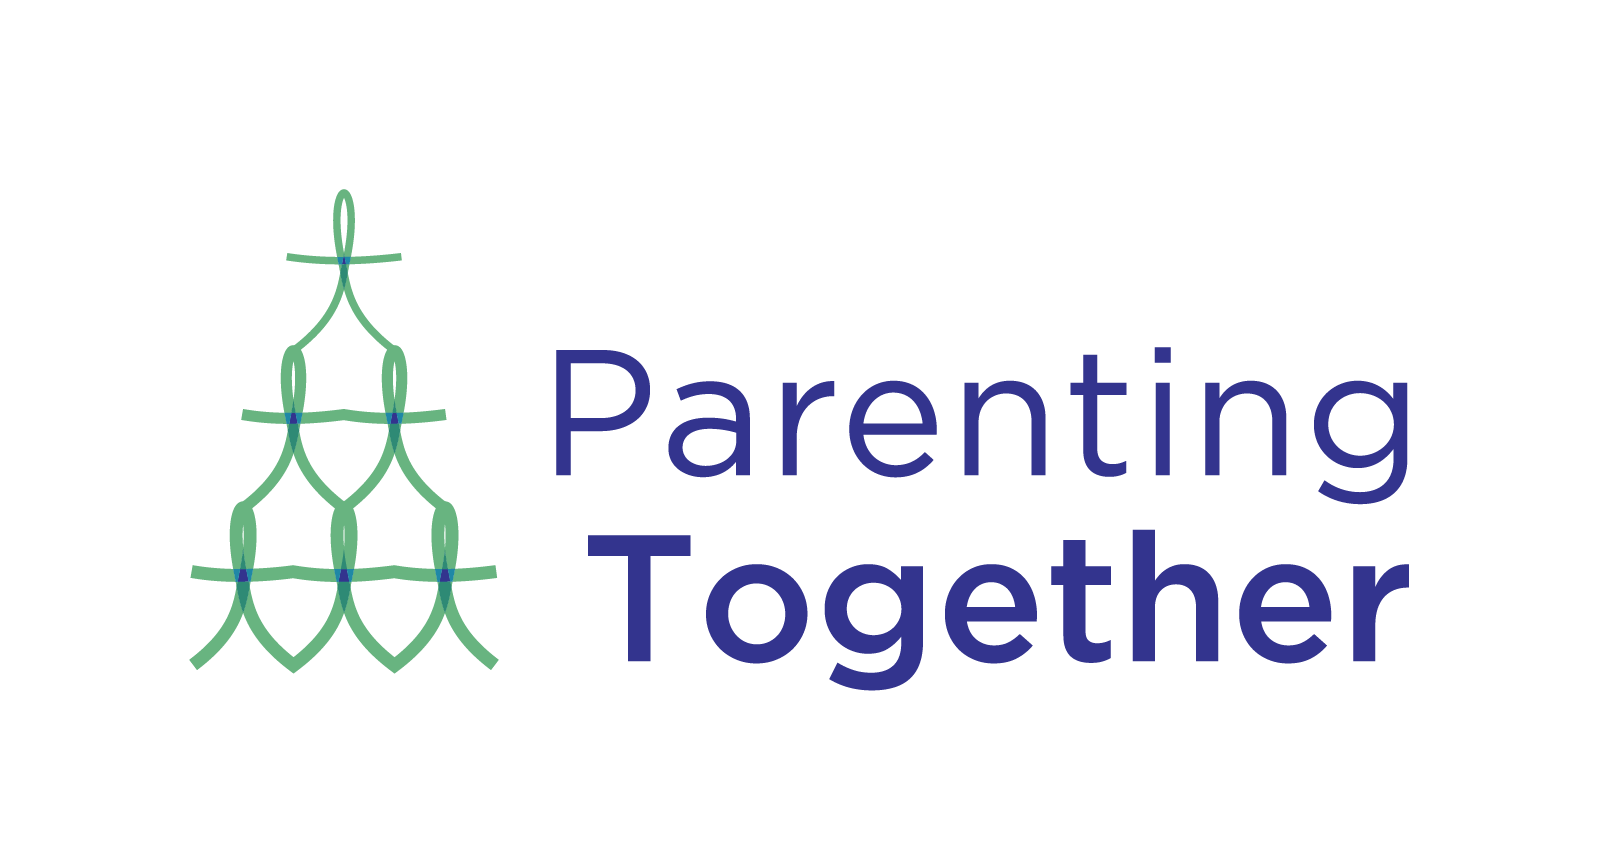 Parenting Together charity